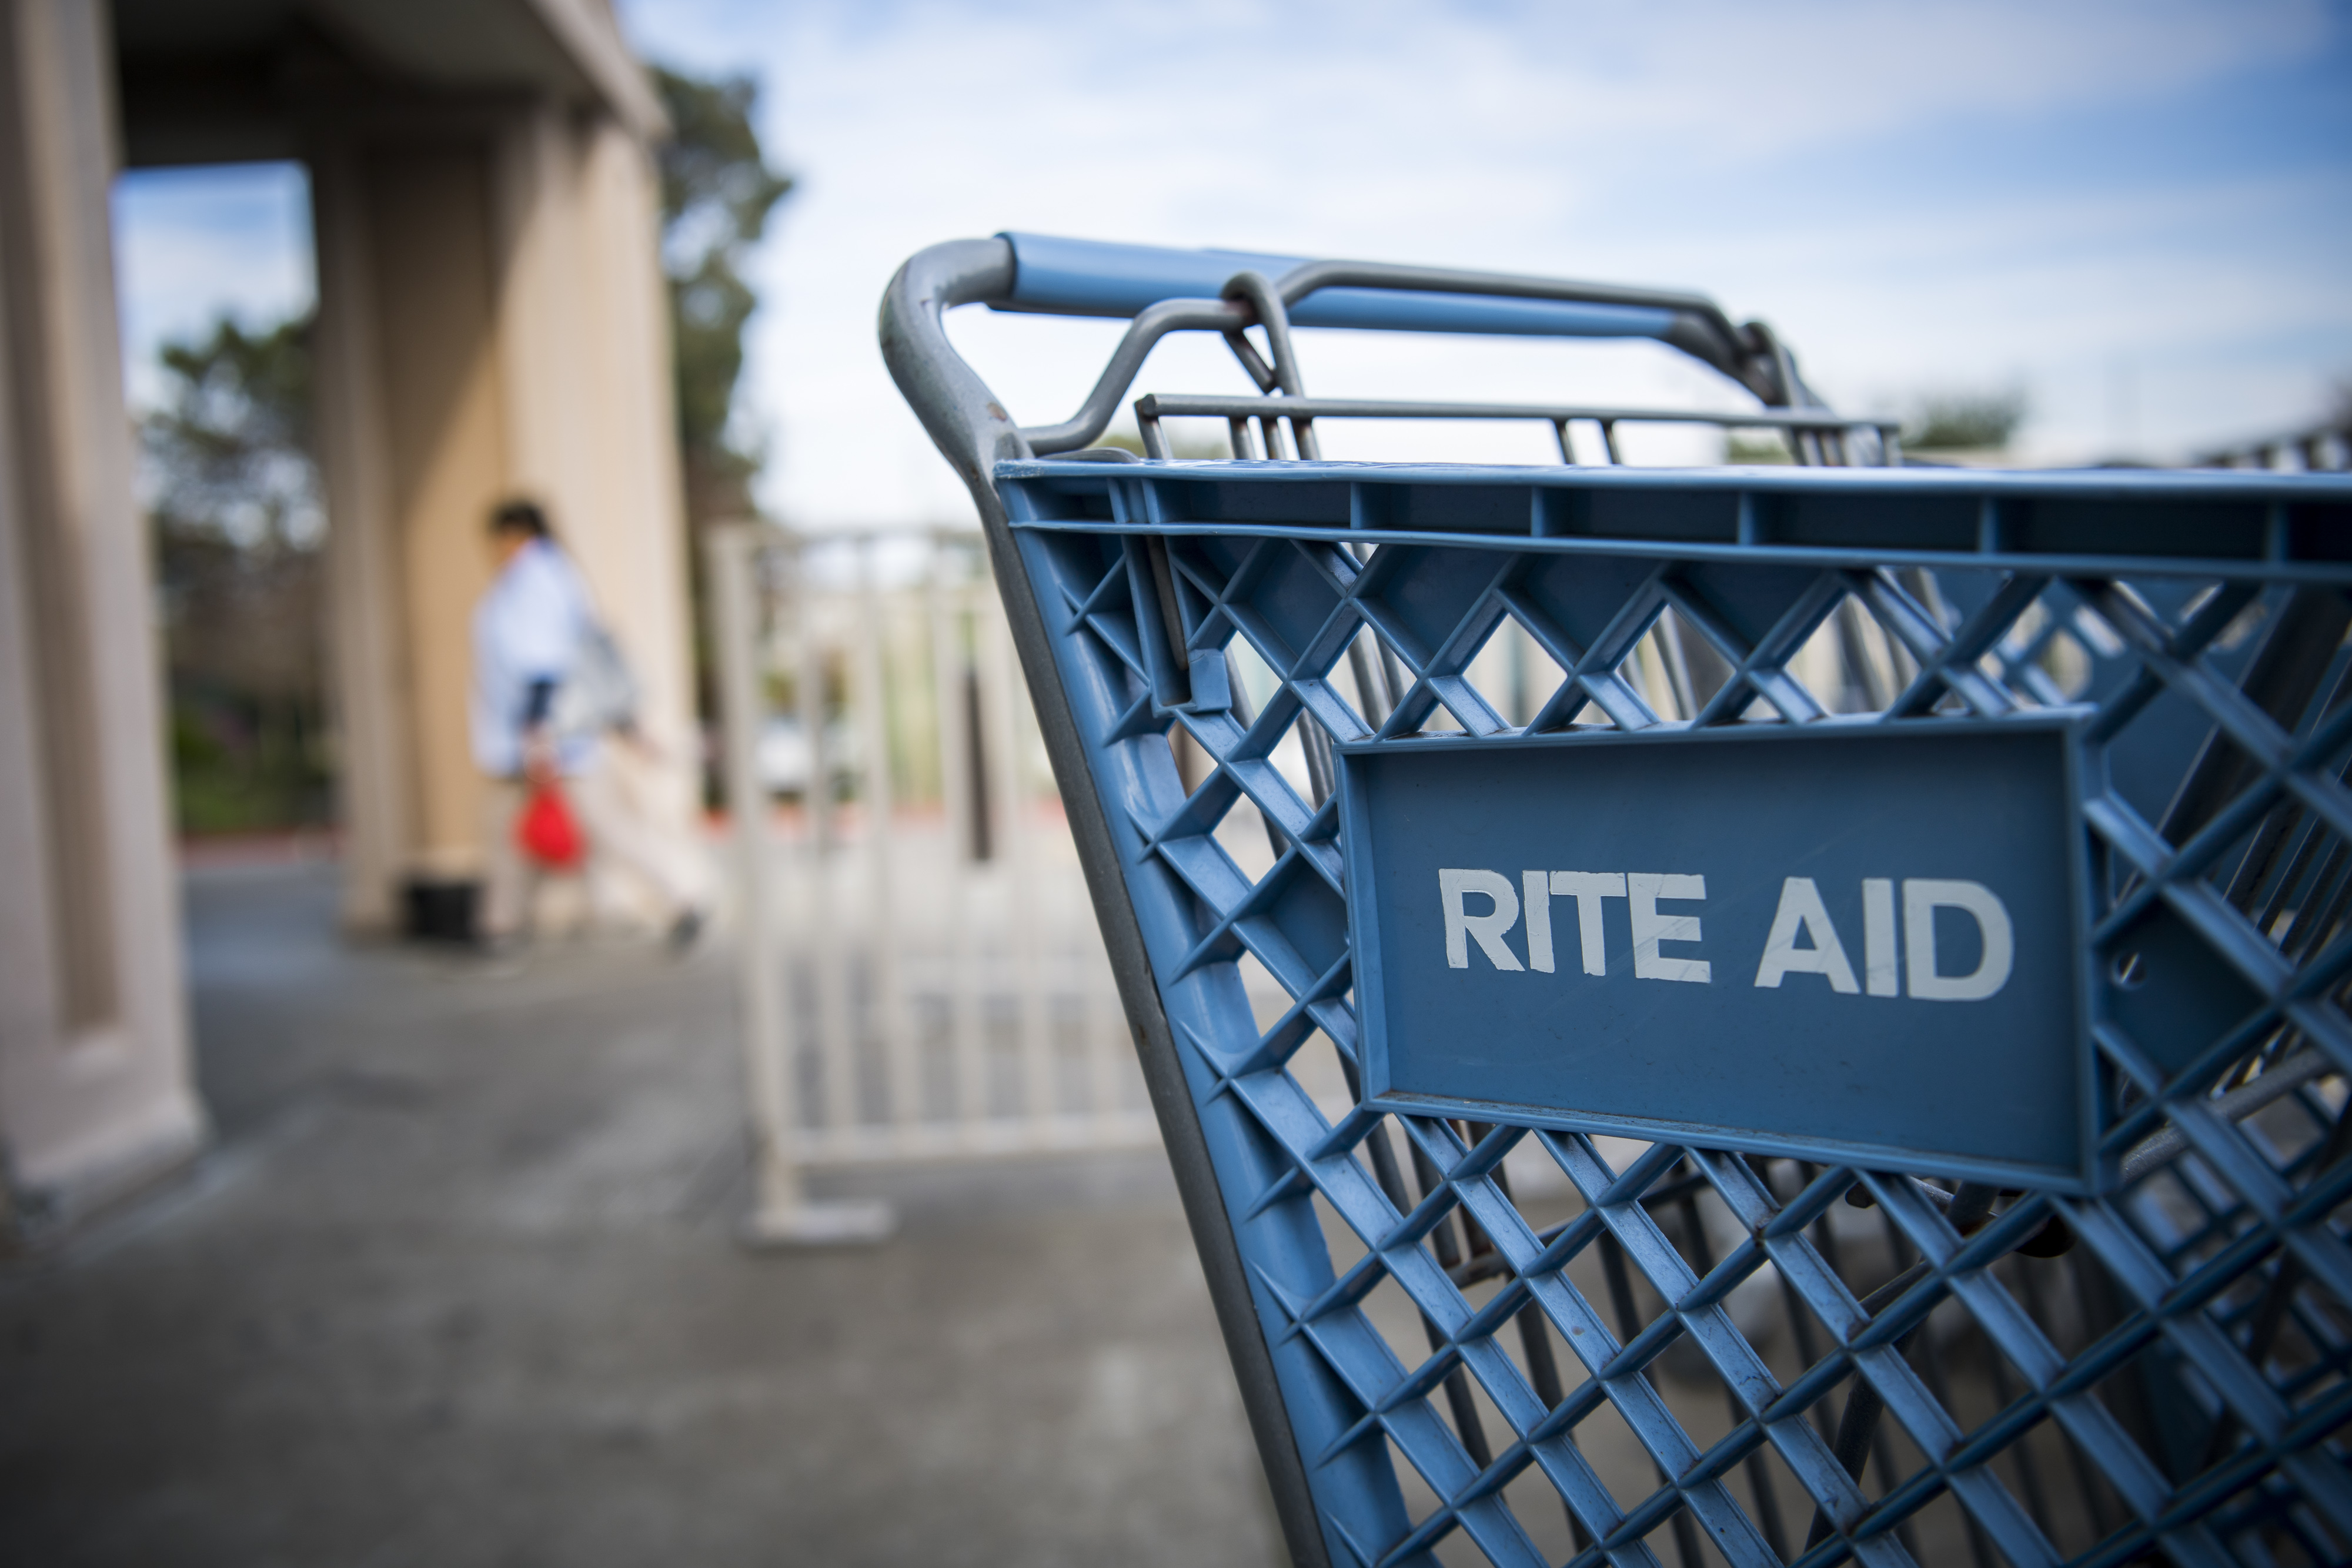 Signage is displayed on a shopping cart outside a Rite Aid Corp. store in Hercules, California on  Jan. 2, 2018. (David Paul Morris&mdash;Bloomberg via Getty Images)